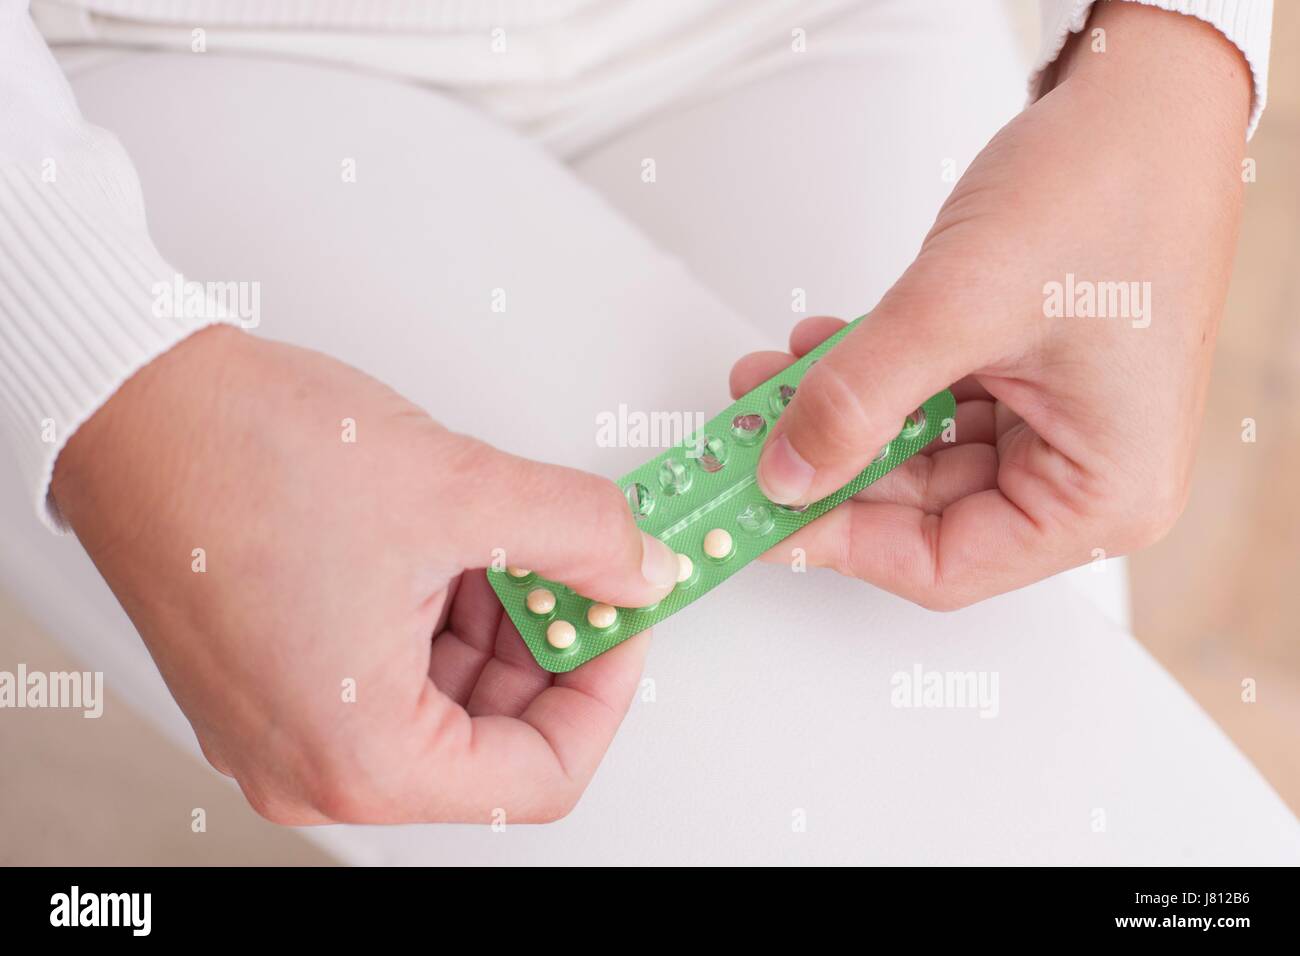 Woman holding blister pack with contraceptive pills. Stock Photo